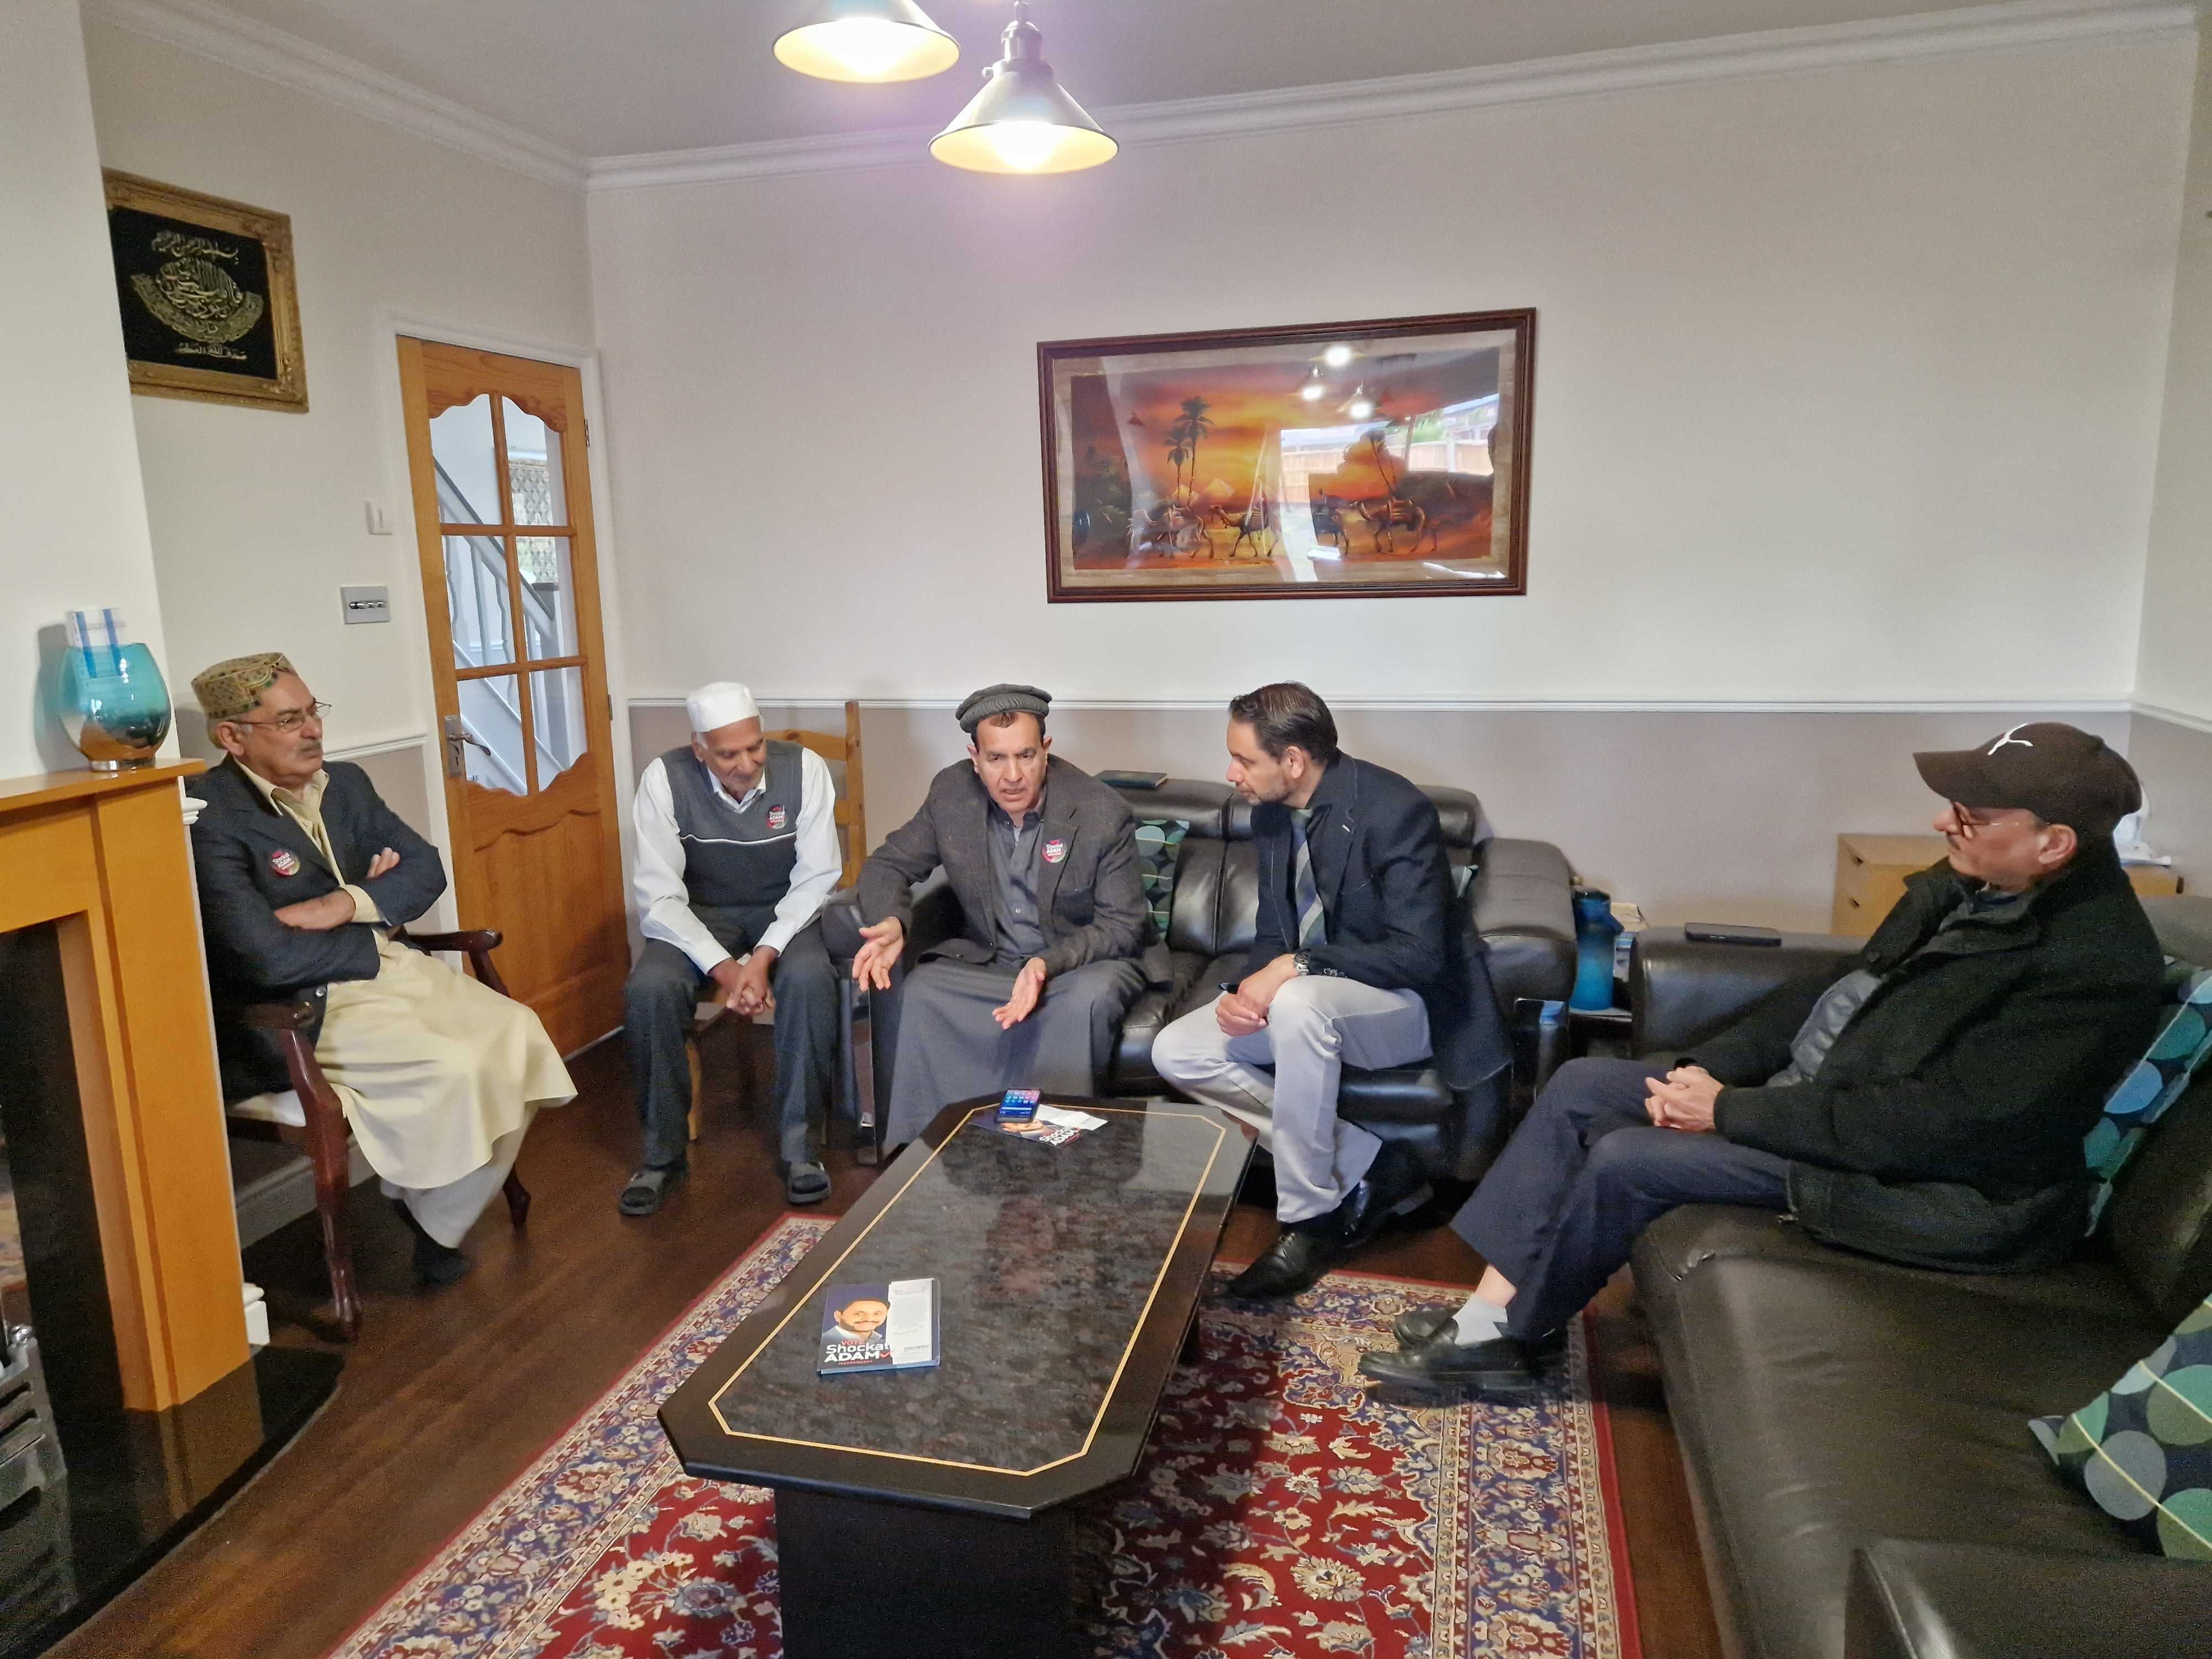 Mohammed Arif, General Secretary of the British Pakistani Association Leicestershire (third from left) talks to candidate Shockat Adam in a meeting of the local British Pakistani community